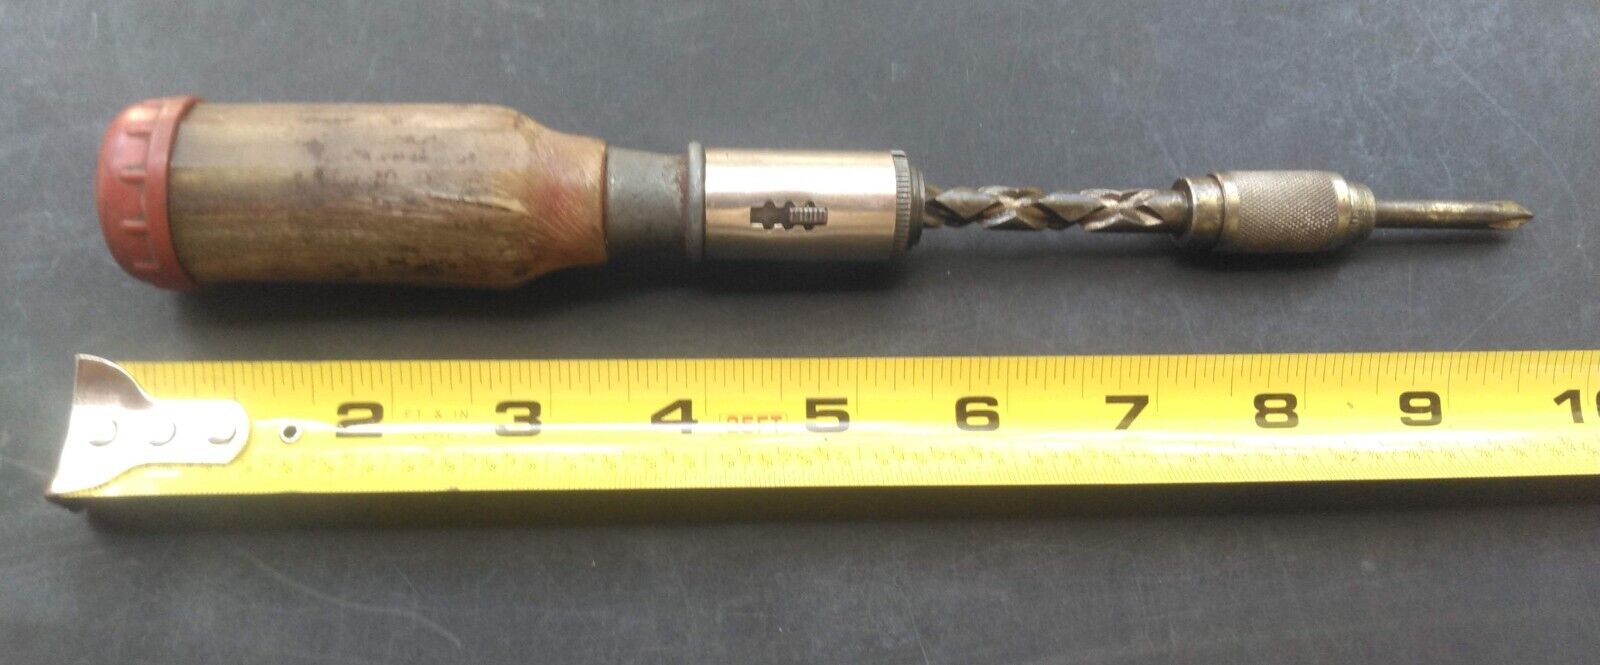 Vtg Automatic Drill King Yankee-style Spiral Push Screwdriver w/ 6 Bits Germany